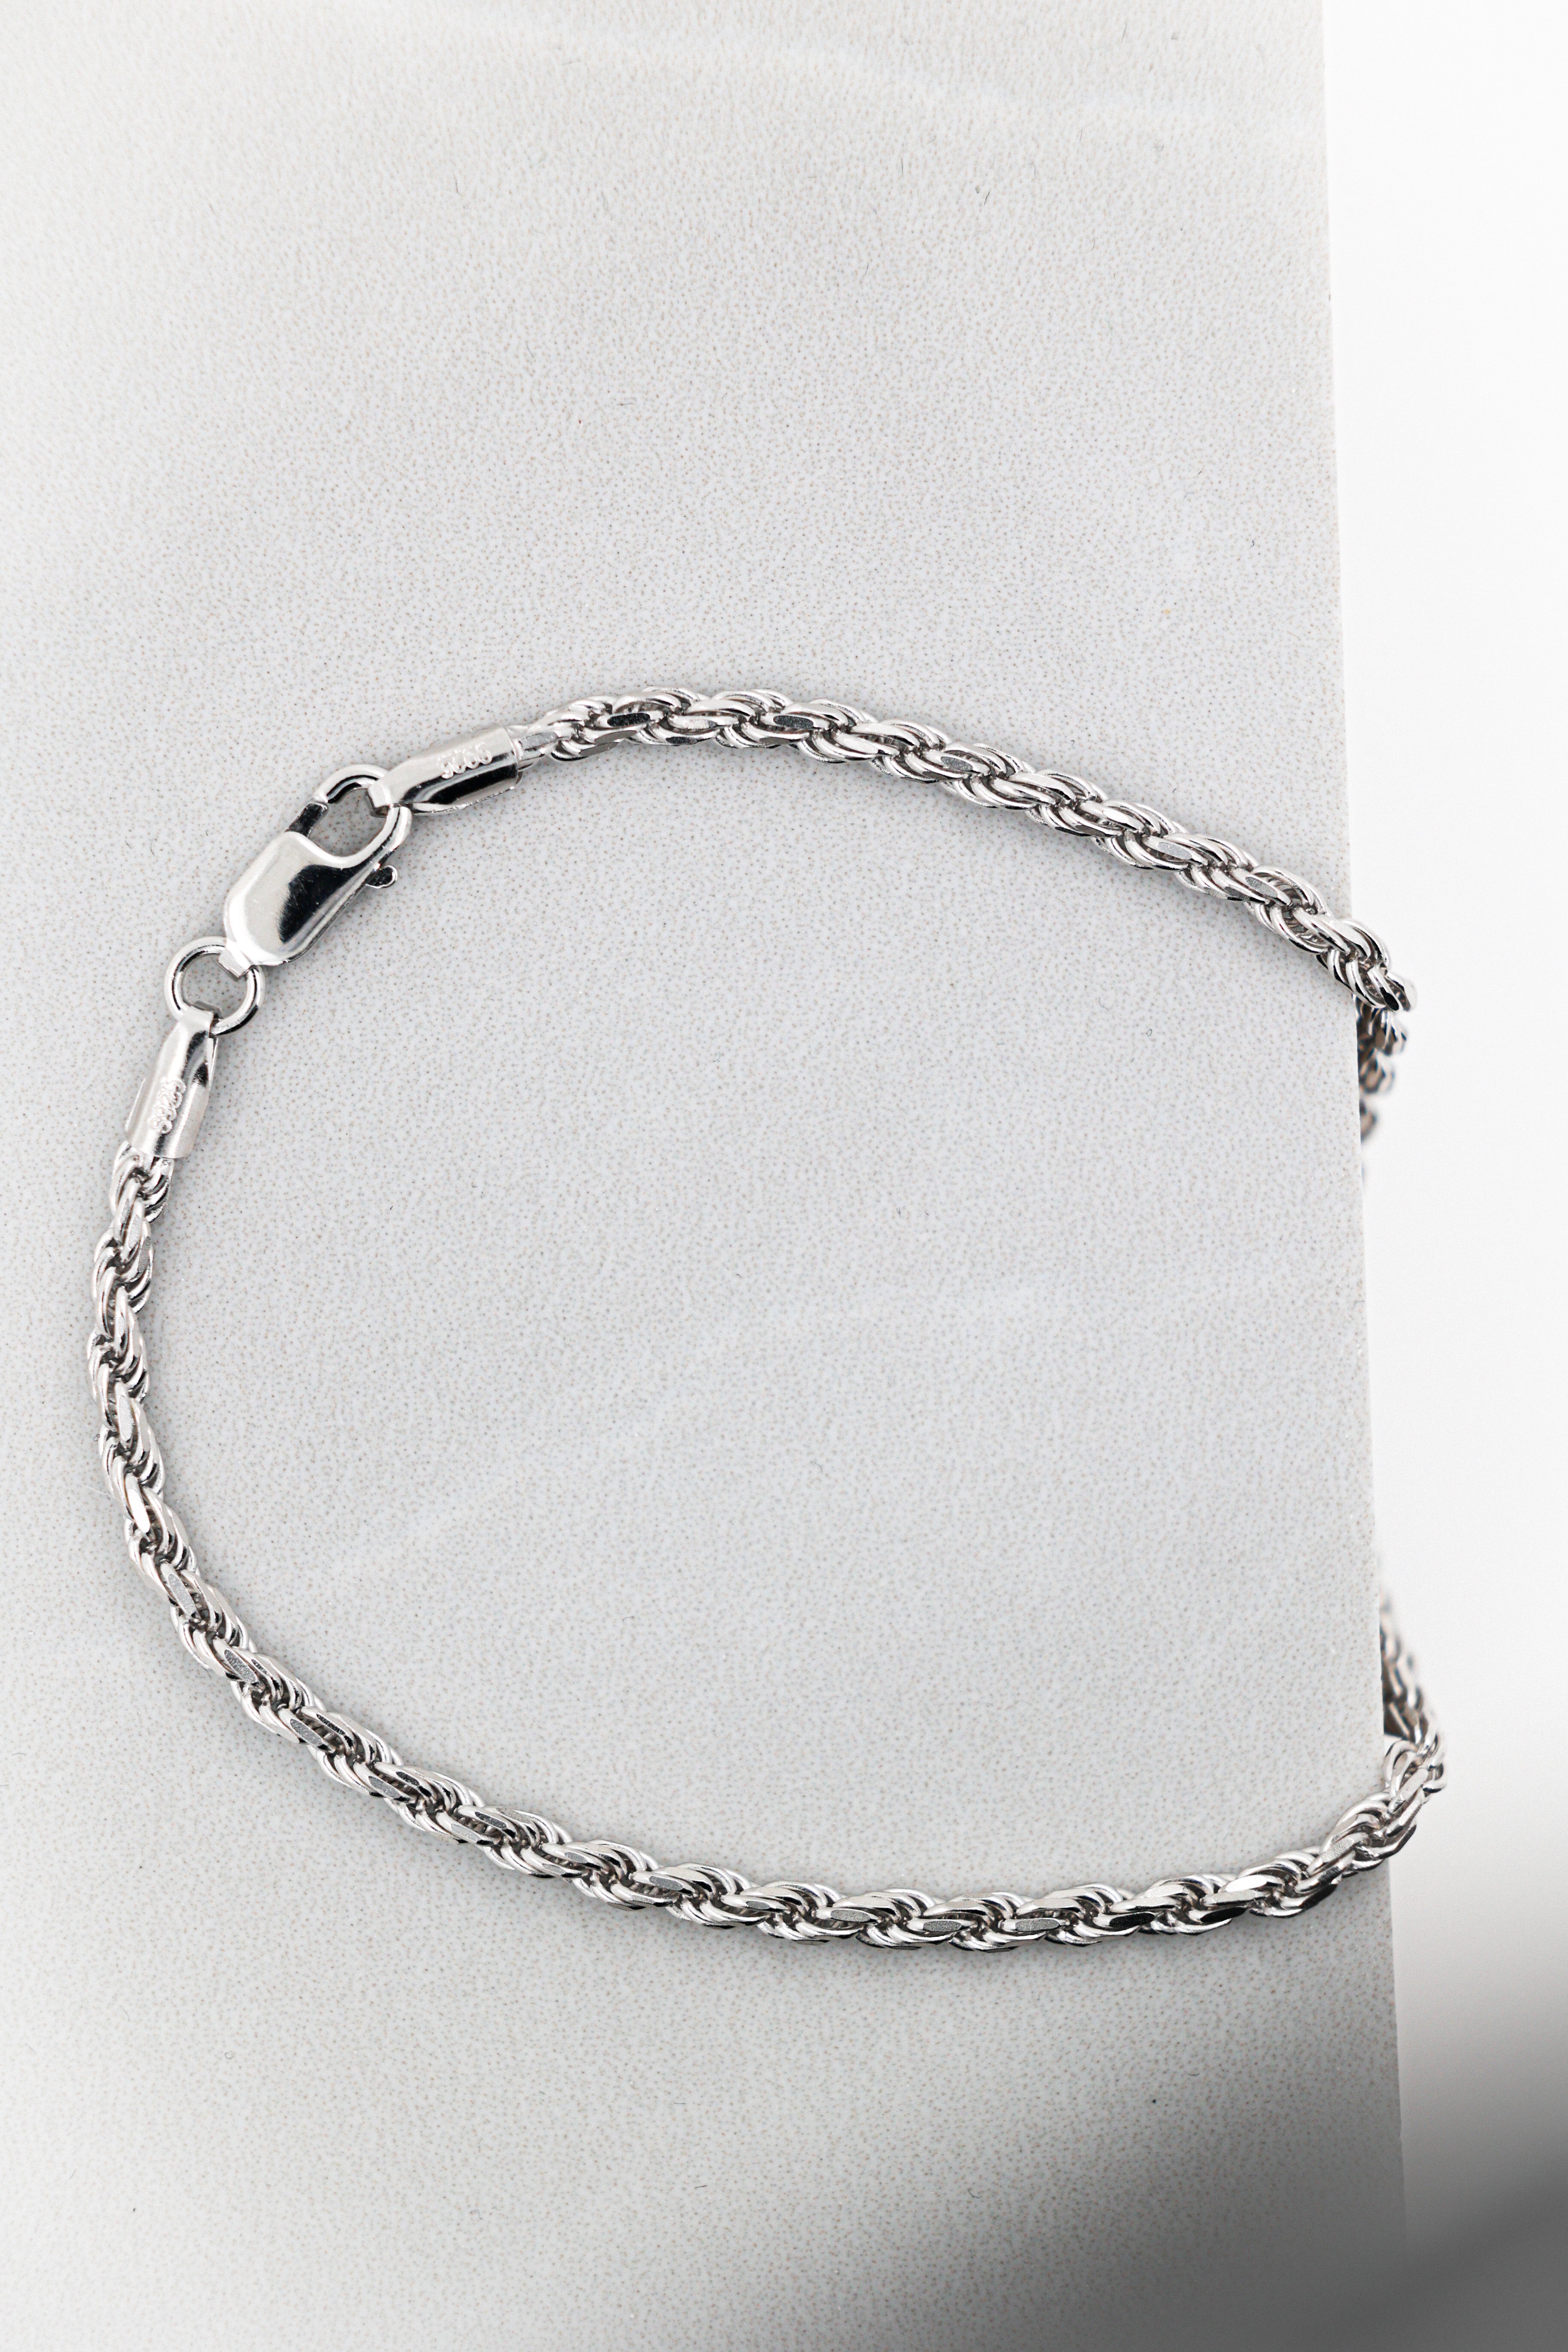 Silver Rope Chain Bracelet 5MM – OutrageLondon